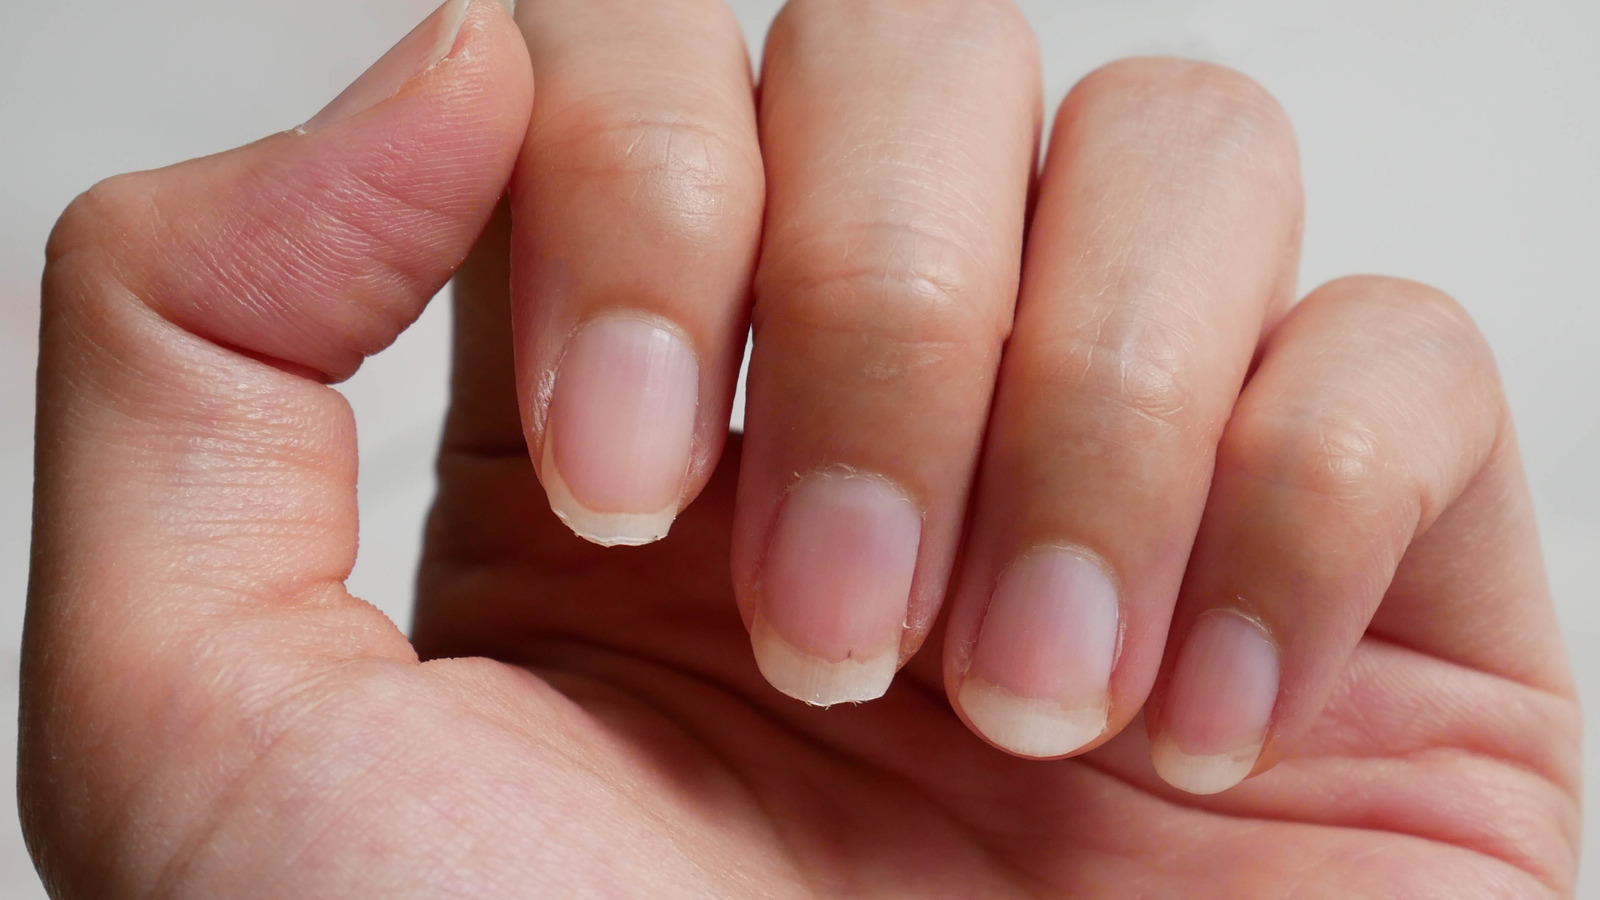 Vitamin B12 deficiency: Koilonychia causes flat or spoon shape nails and is  a symptom to s | Express.co.uk